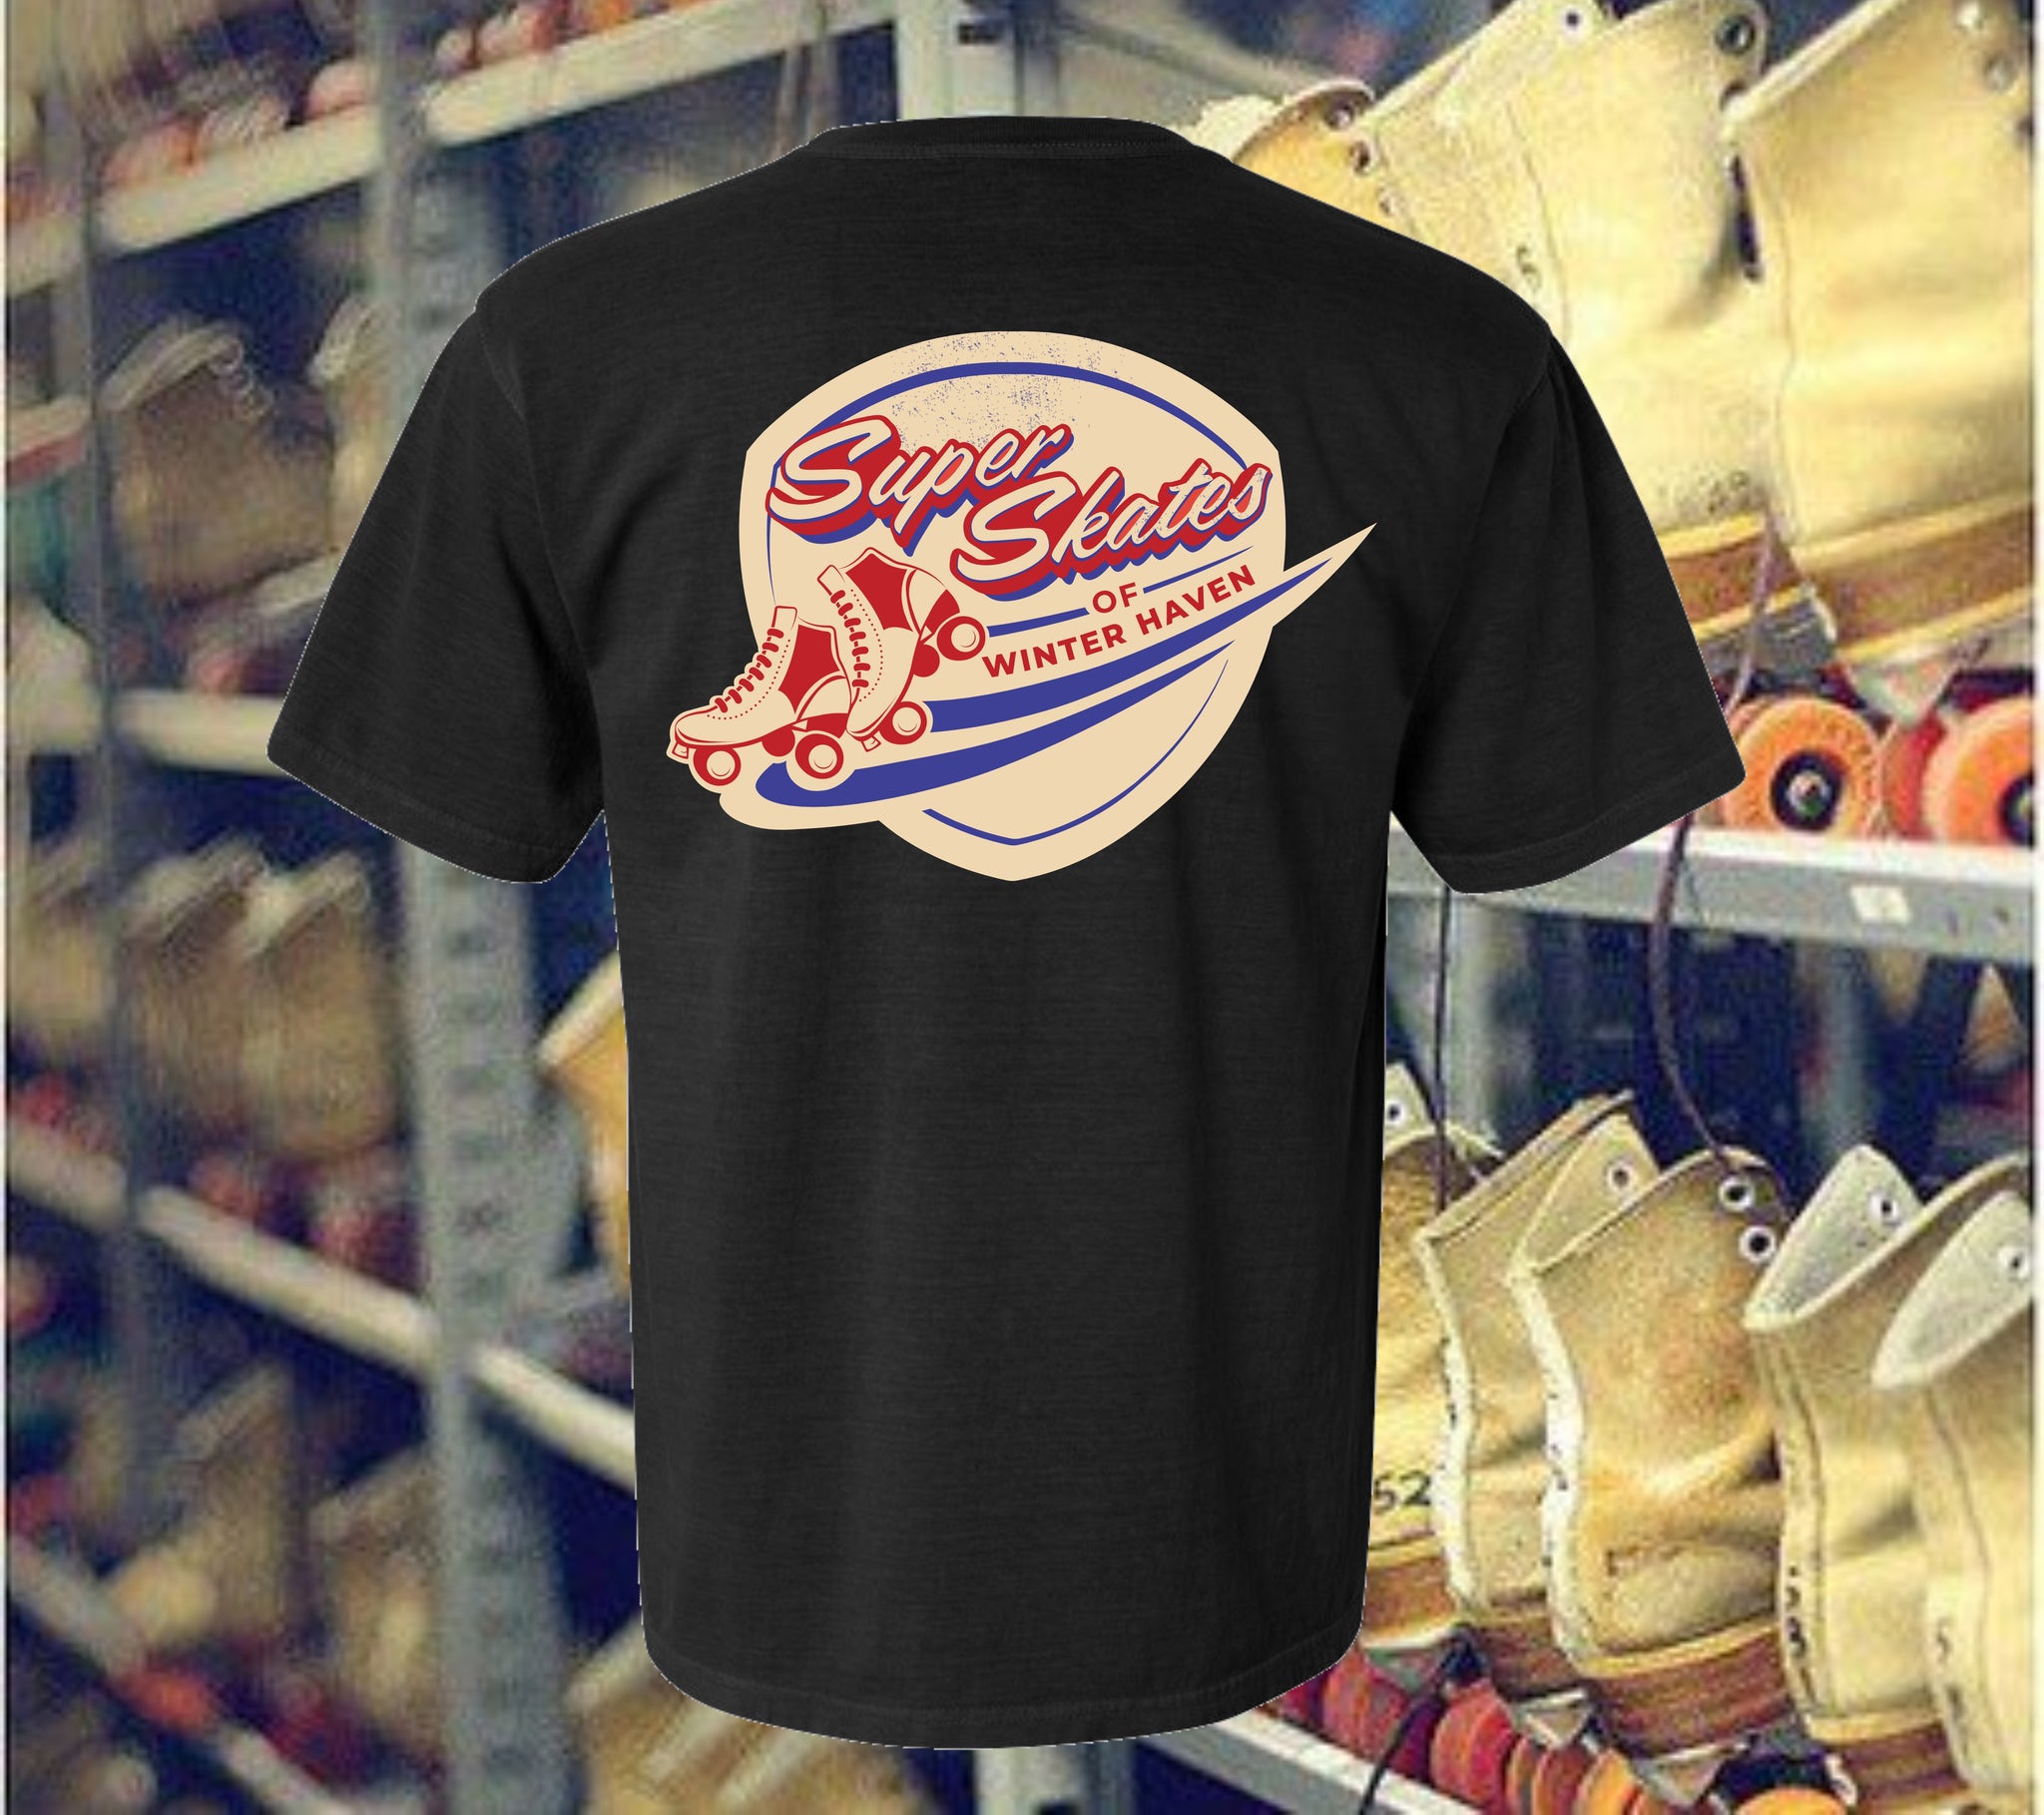 Winter Haven Throwback "Super Skates" t-shirt by local Artist Brooke Brady Moore-Unisex